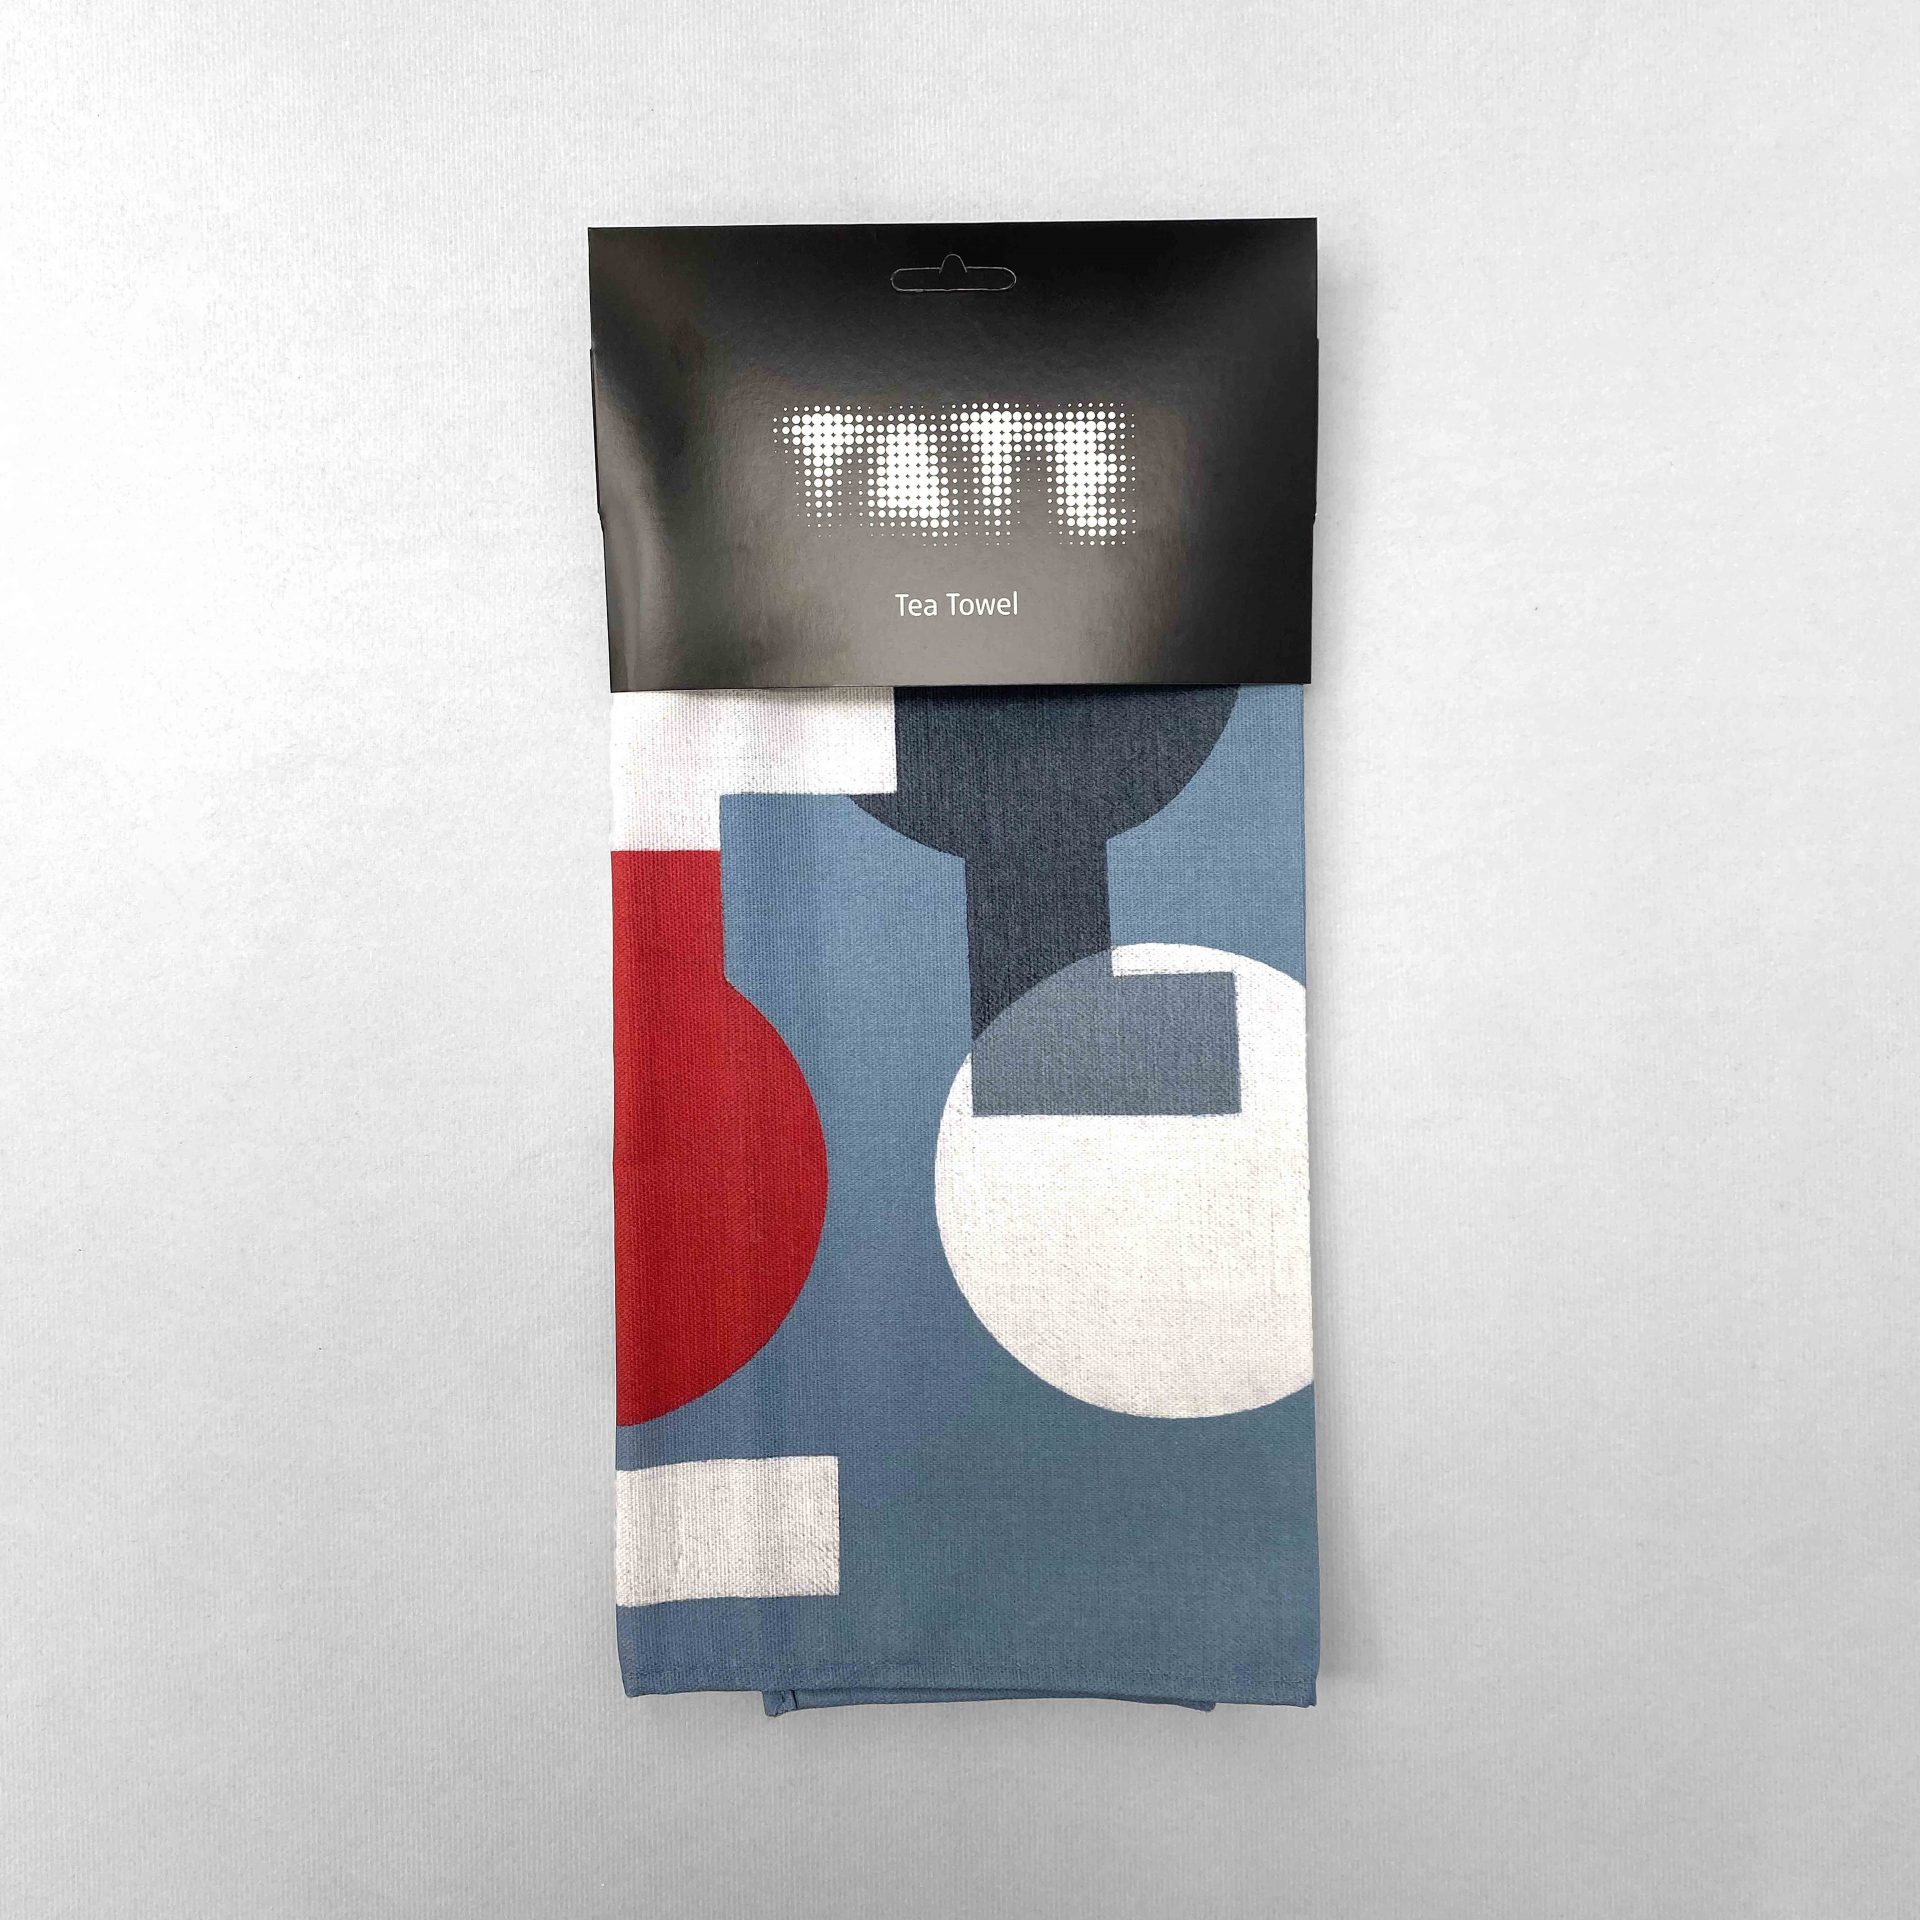 Printed tea towel with header card made in the UK by Paul Bristow